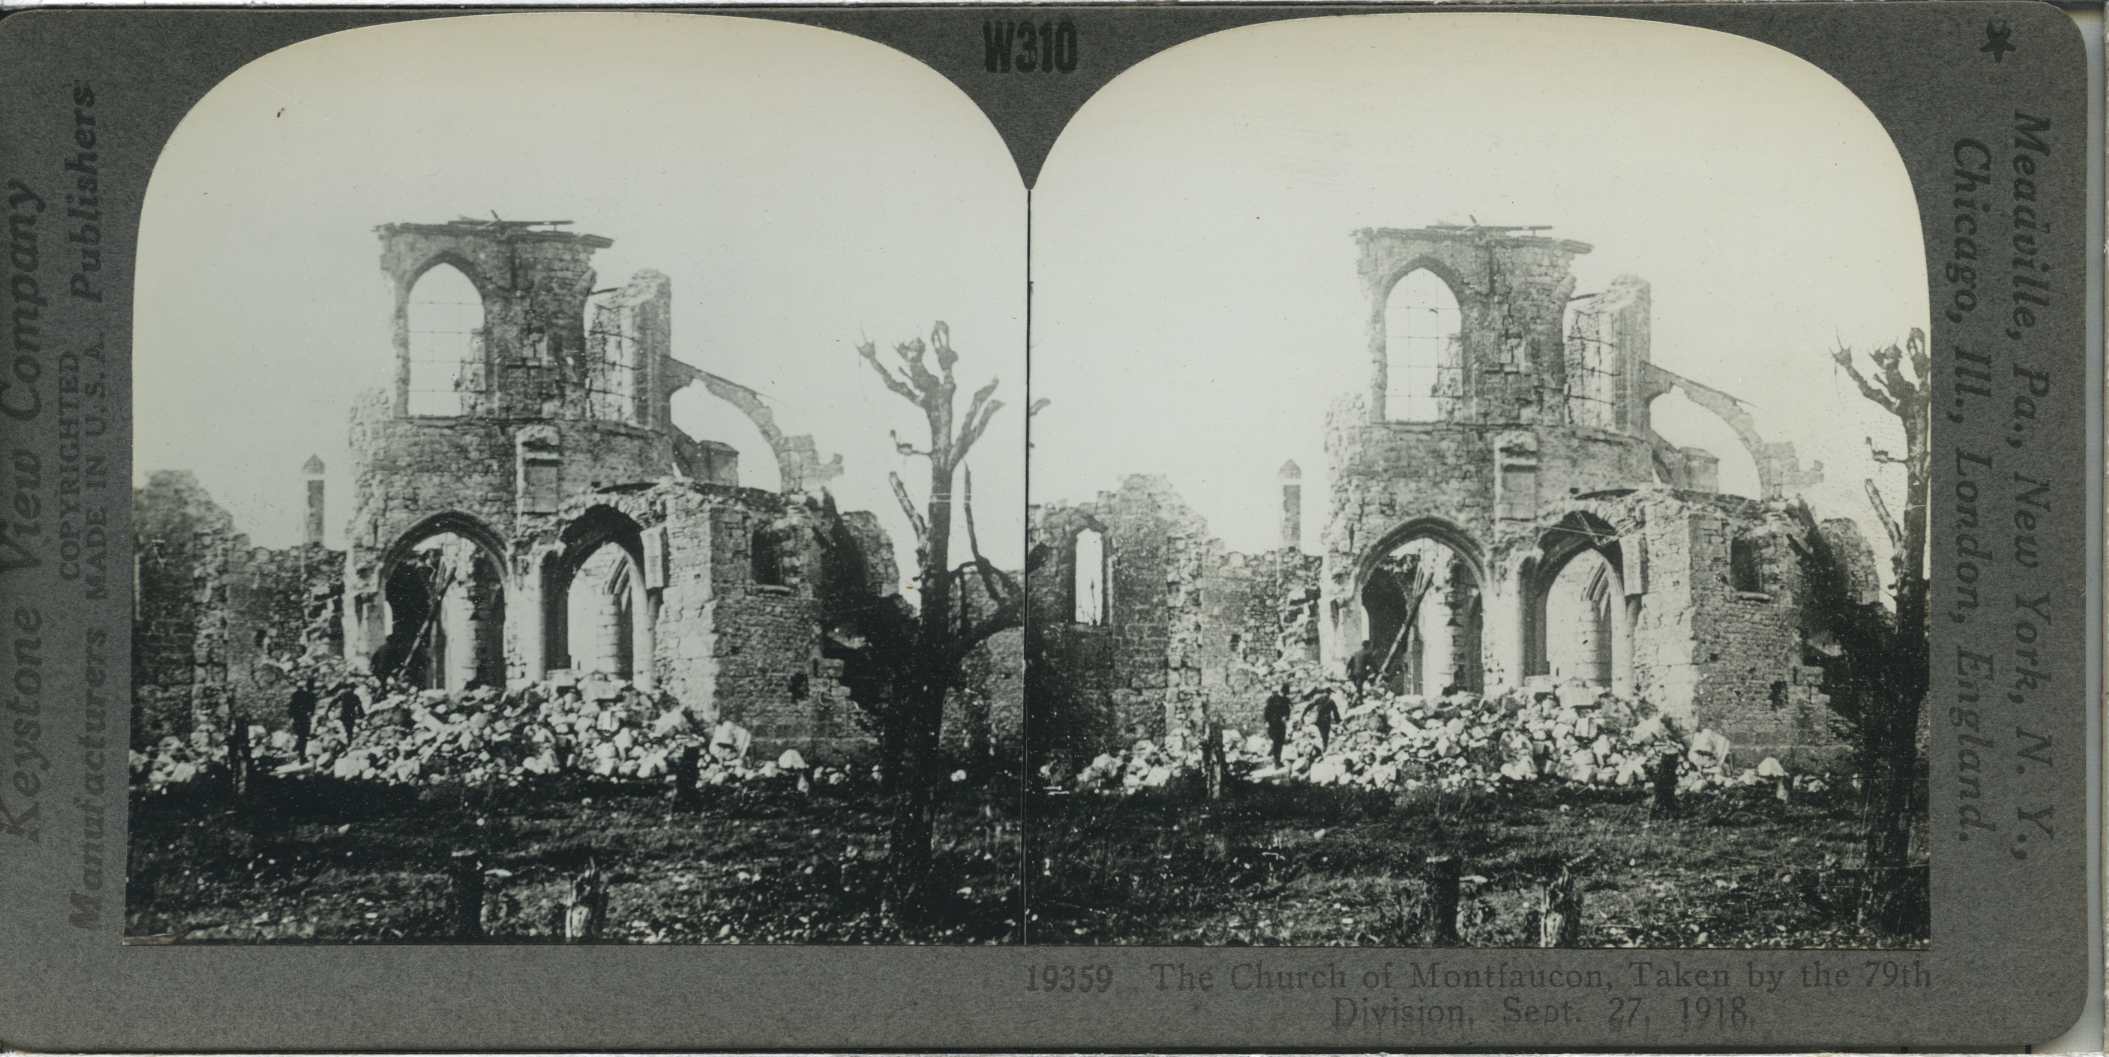 The Church of Montfaucon, Taken by the 79th Division, Sept. 27, 1918